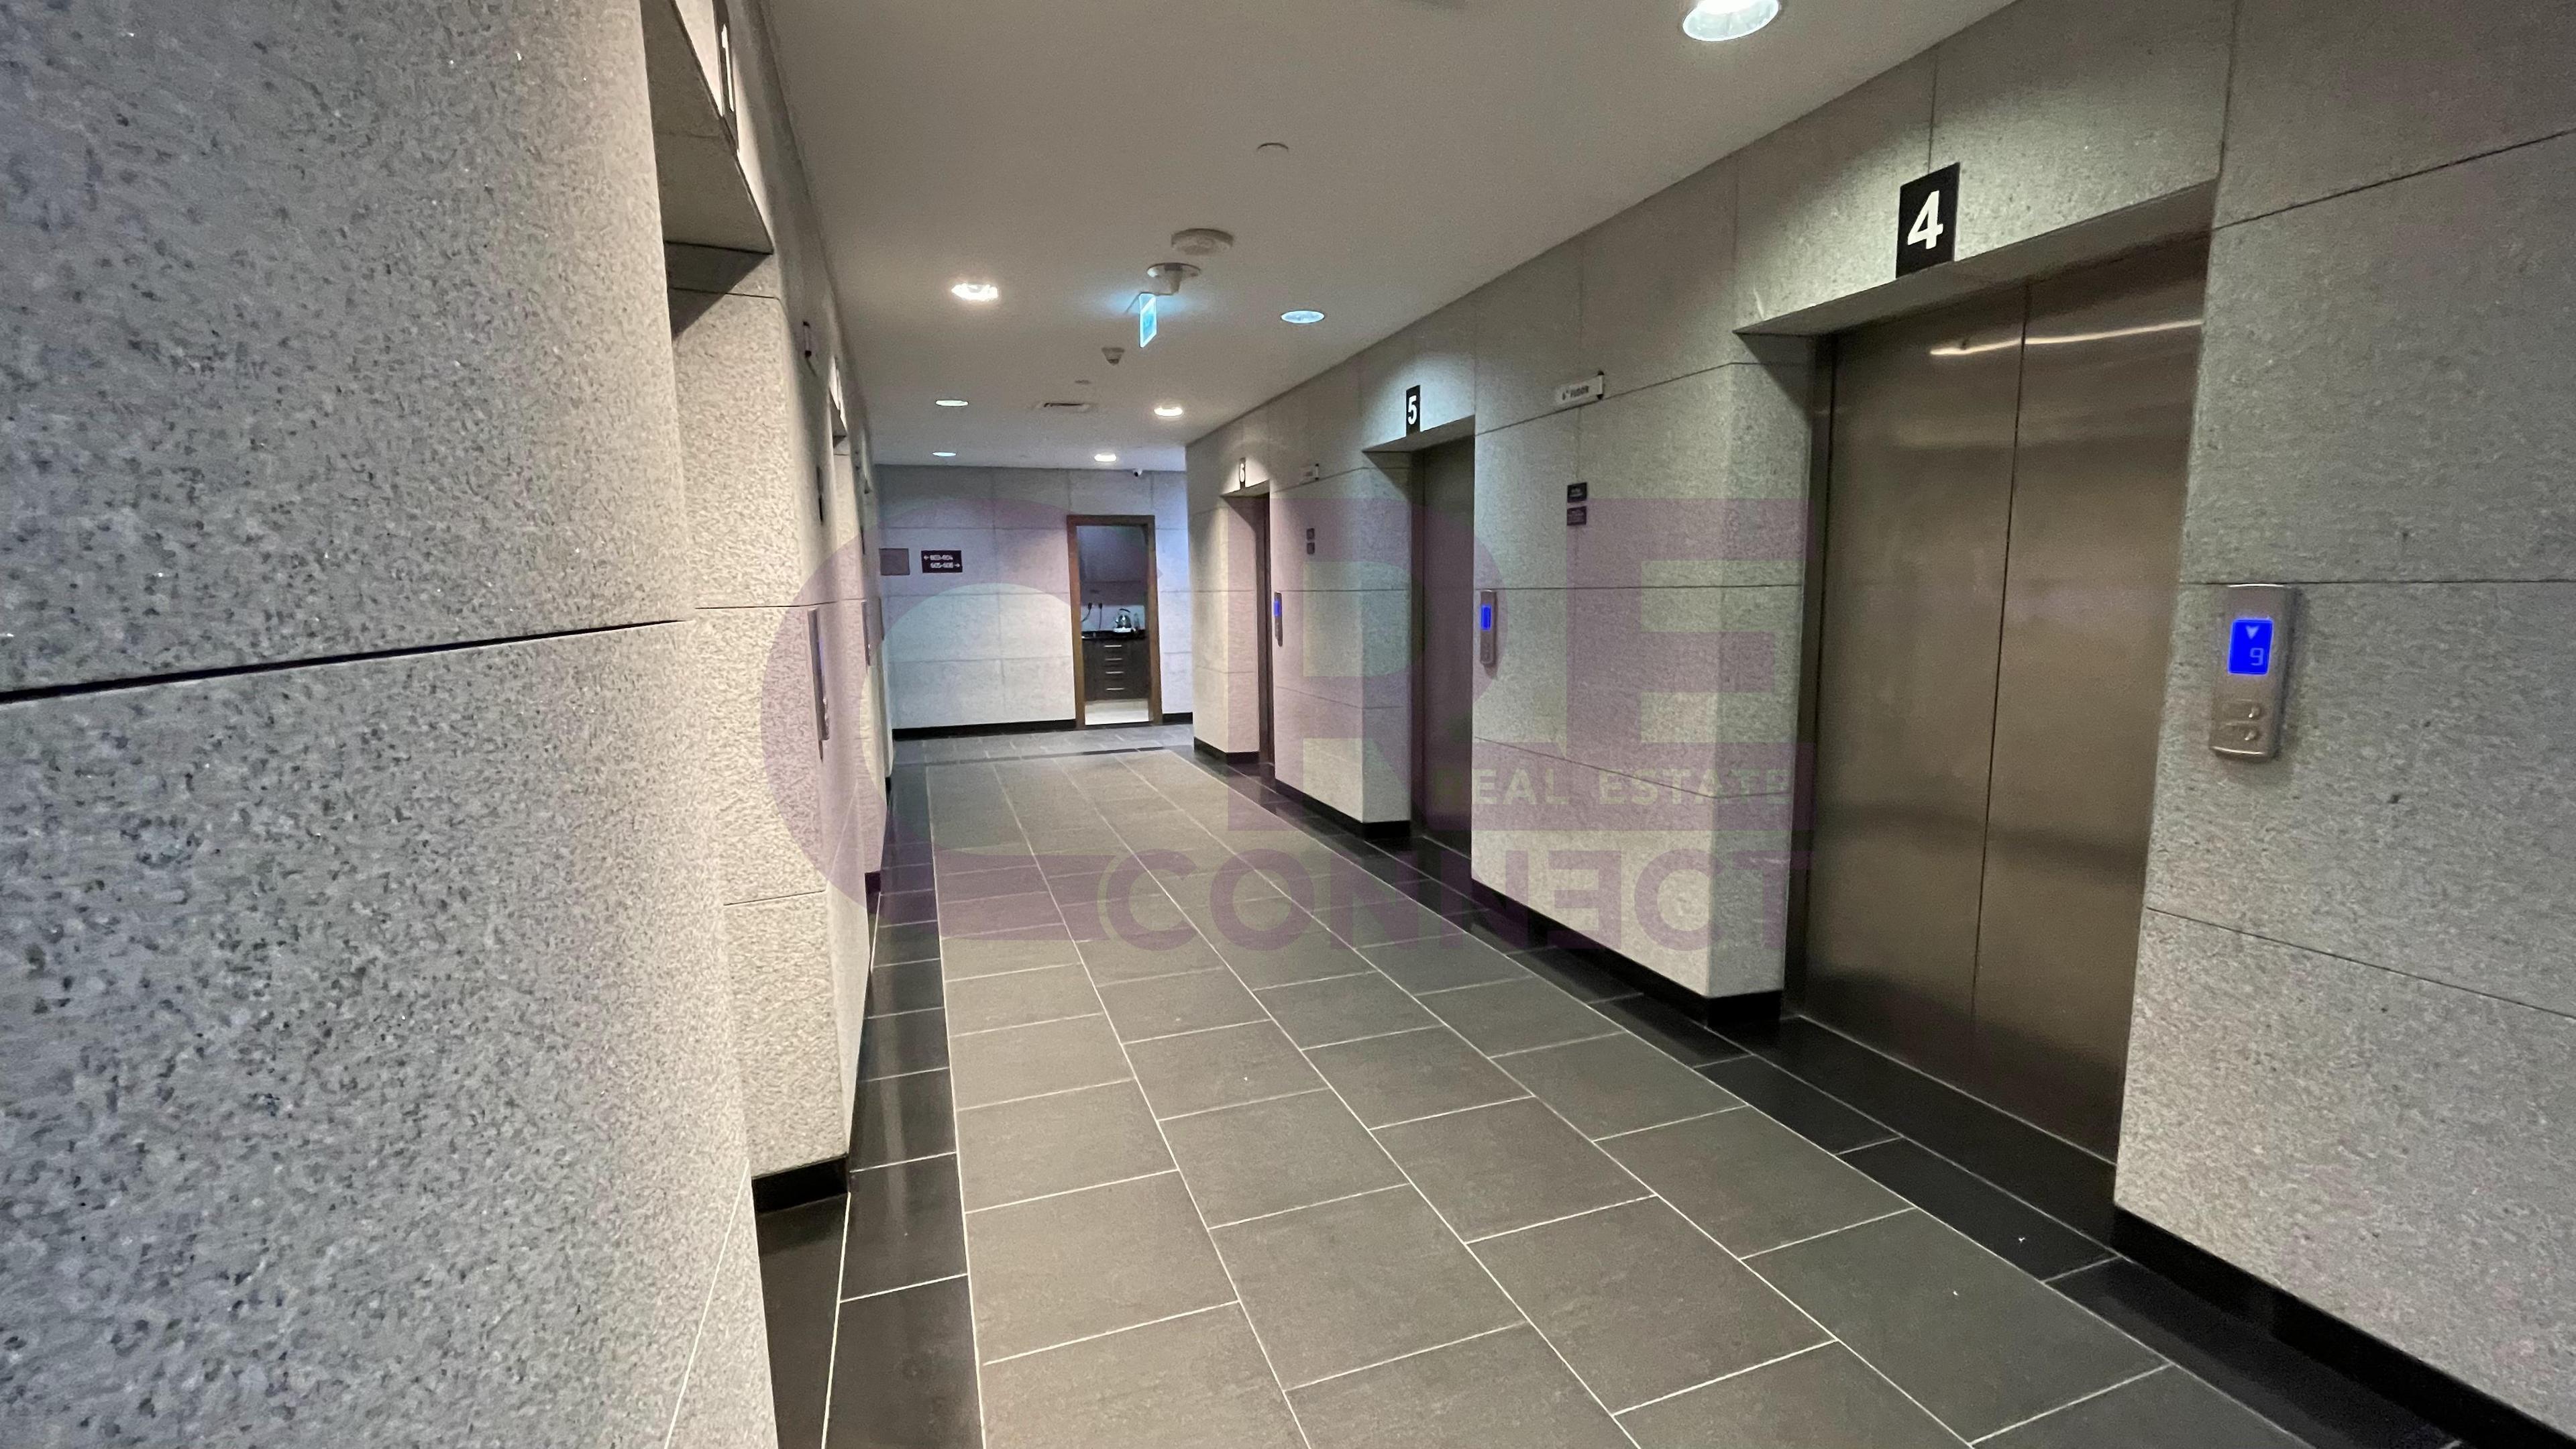 2 bath Office Space for rent in Guardian Towers, Danet Abu Dhabi, Abu Dhabi for price AED 135300 yearly 